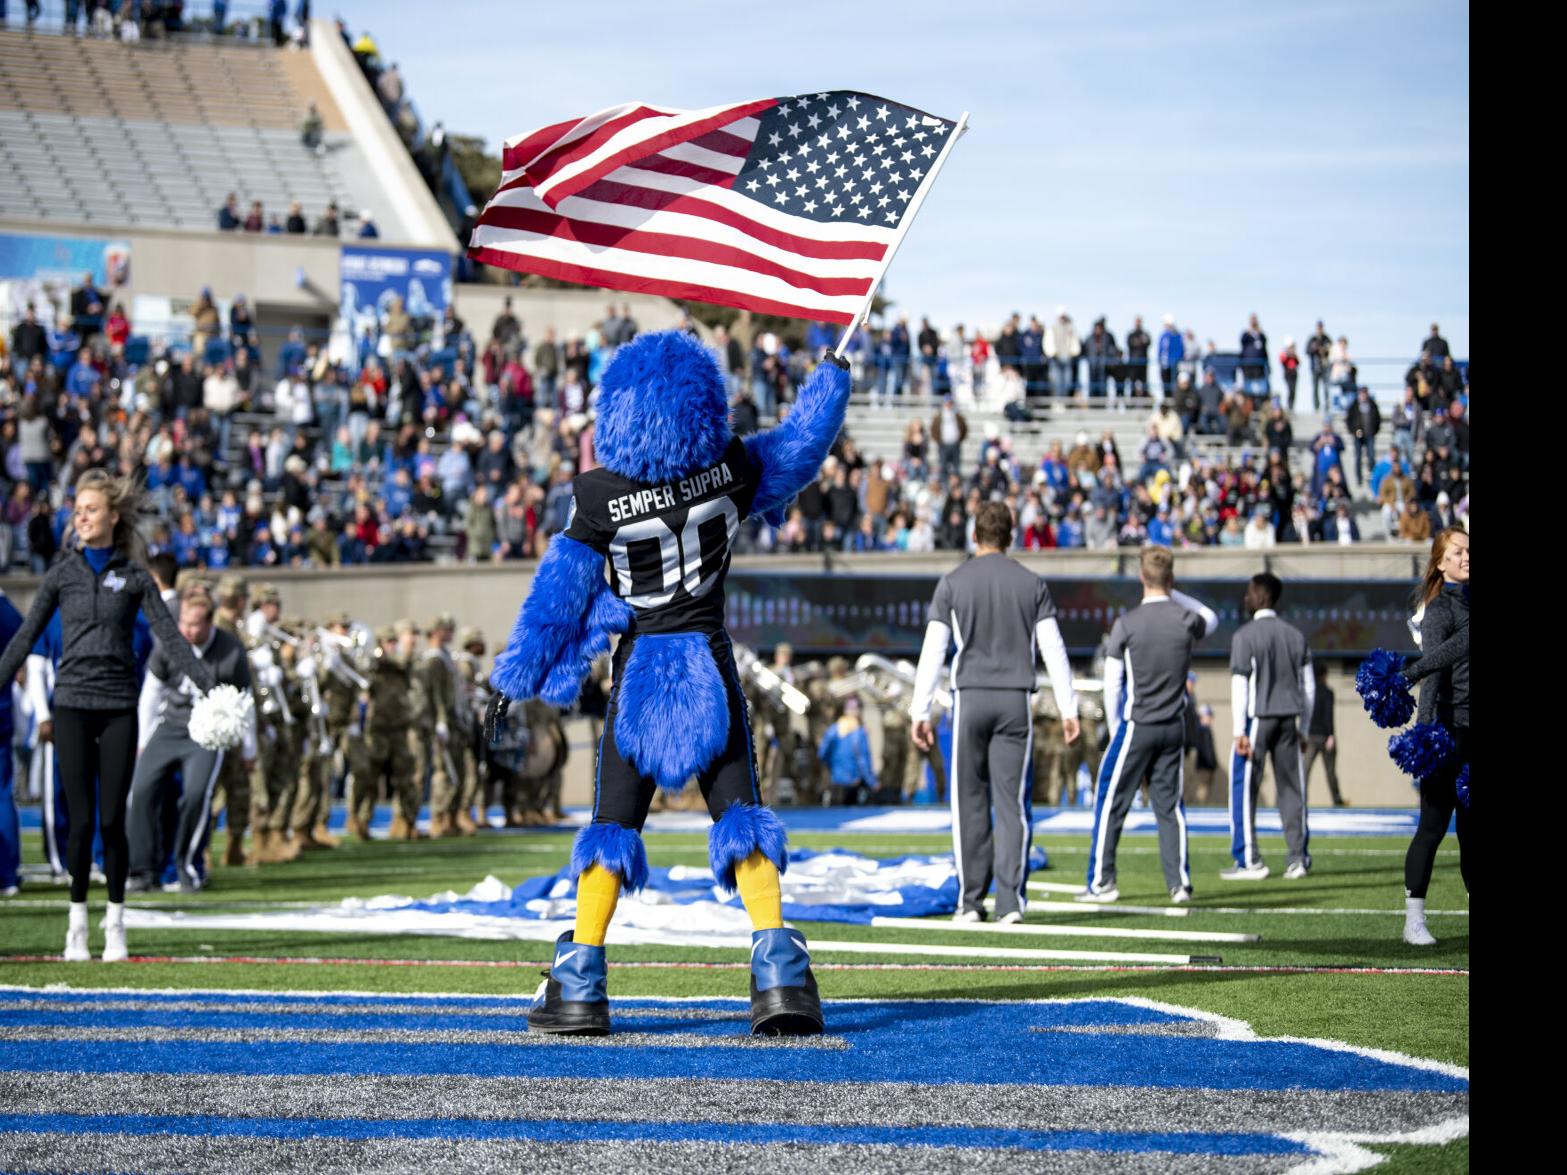 Government shutdown grounds sports at Air Force Academy – New York Daily  News